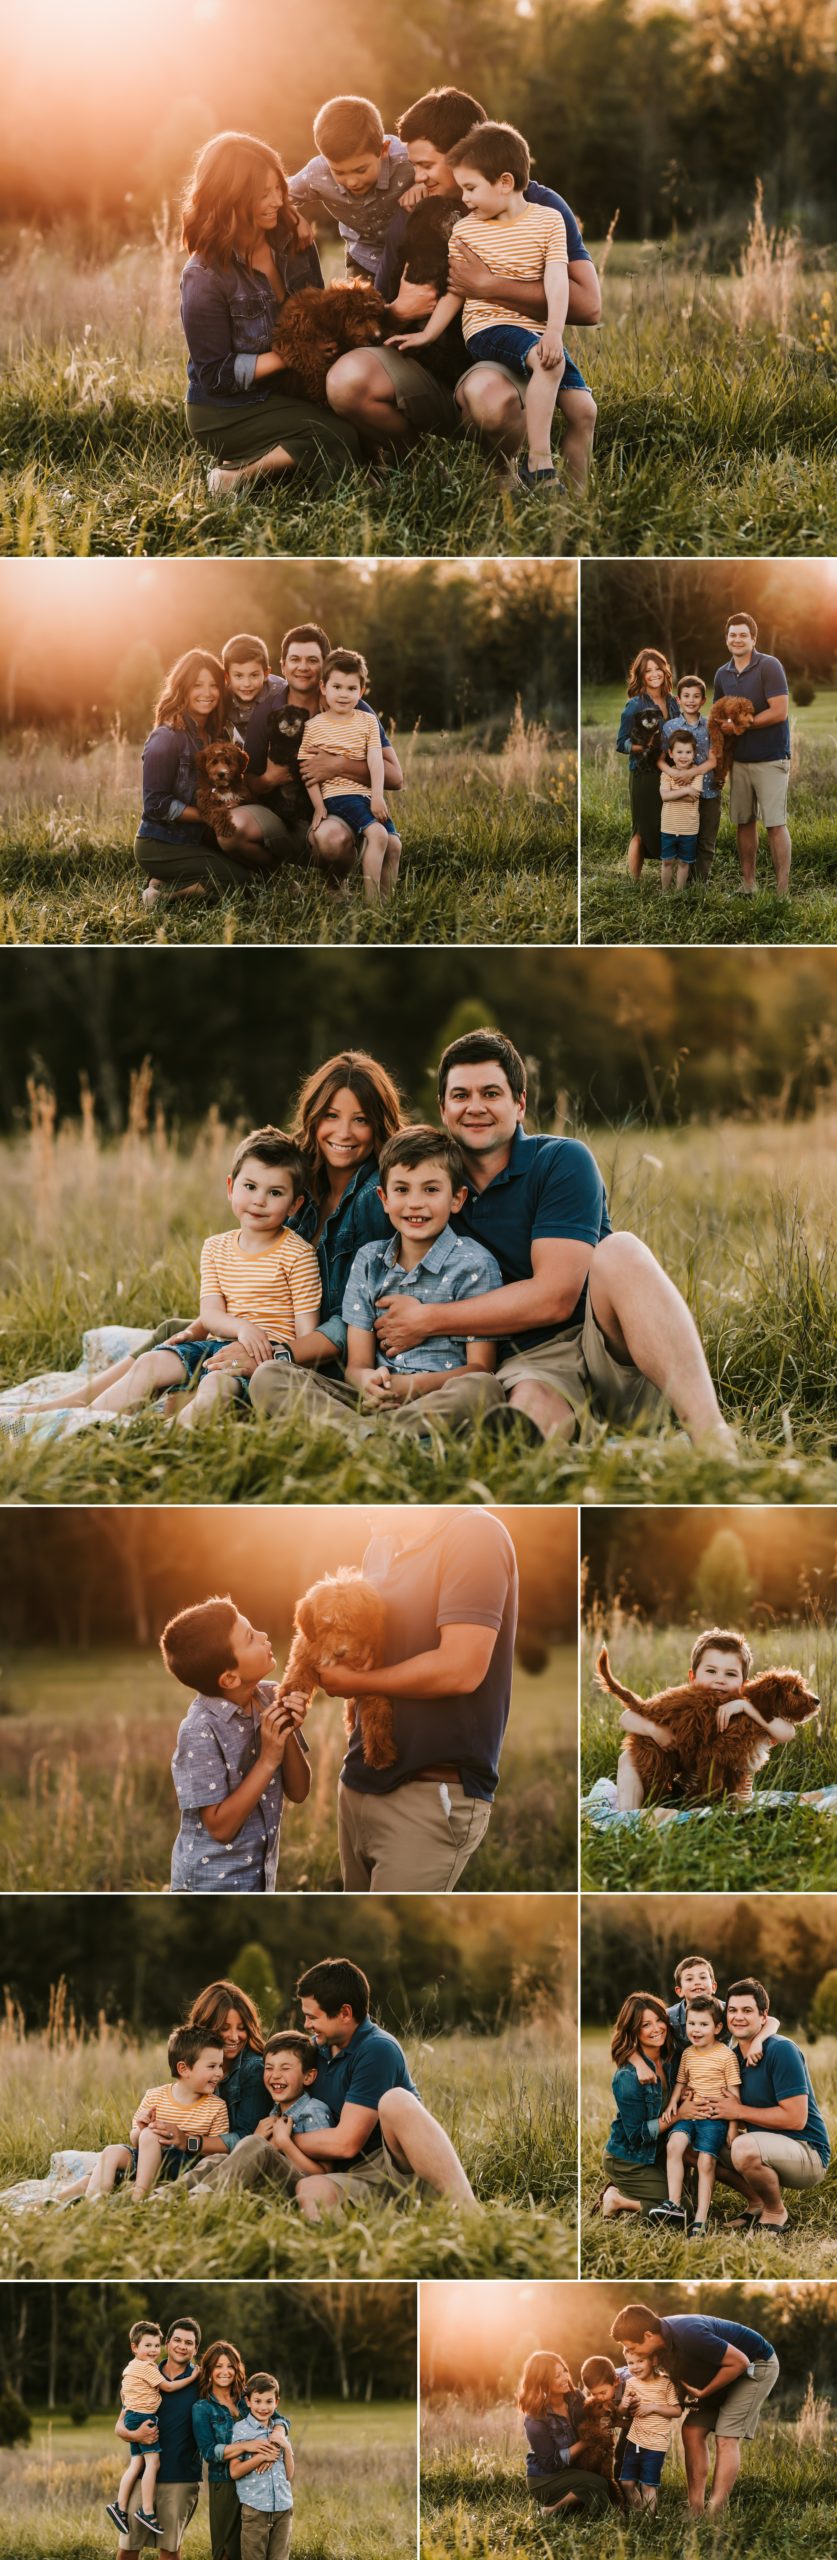 sunset outdoor session family kids dogs grassy area photographer 63090